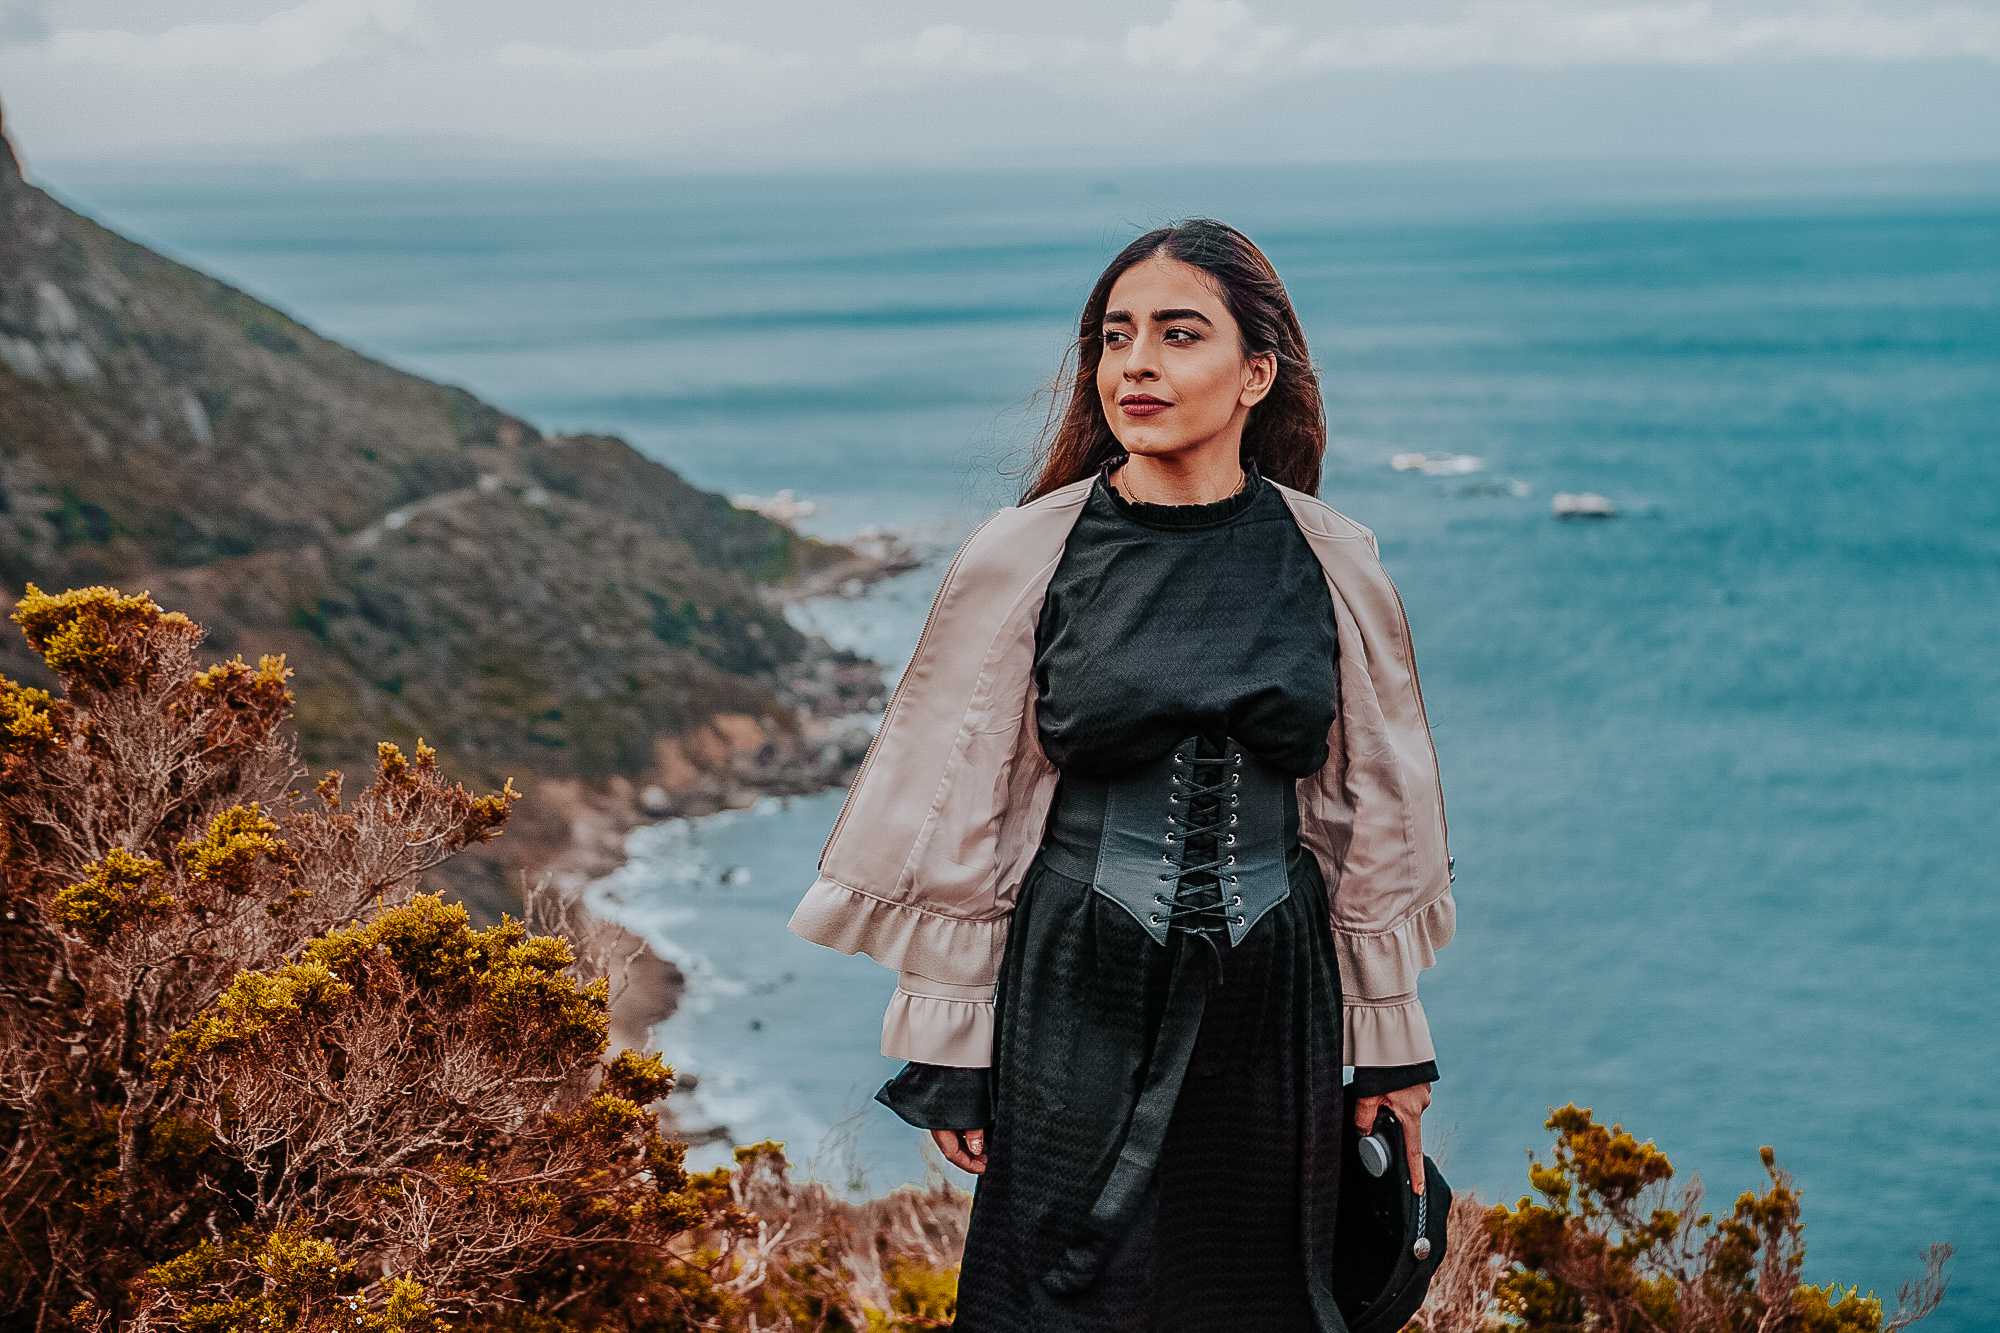 cape town neha menghwani , stylessential, stylessential blog, travel diaries, trave lbog, south africa tourism, travel, cape point, cliff, sea, scenery, what to do in cape town, tourism, travel blogger, fashion blogger, indian travel blog, vero moda, my glamm, mastercard, vacation, goals,